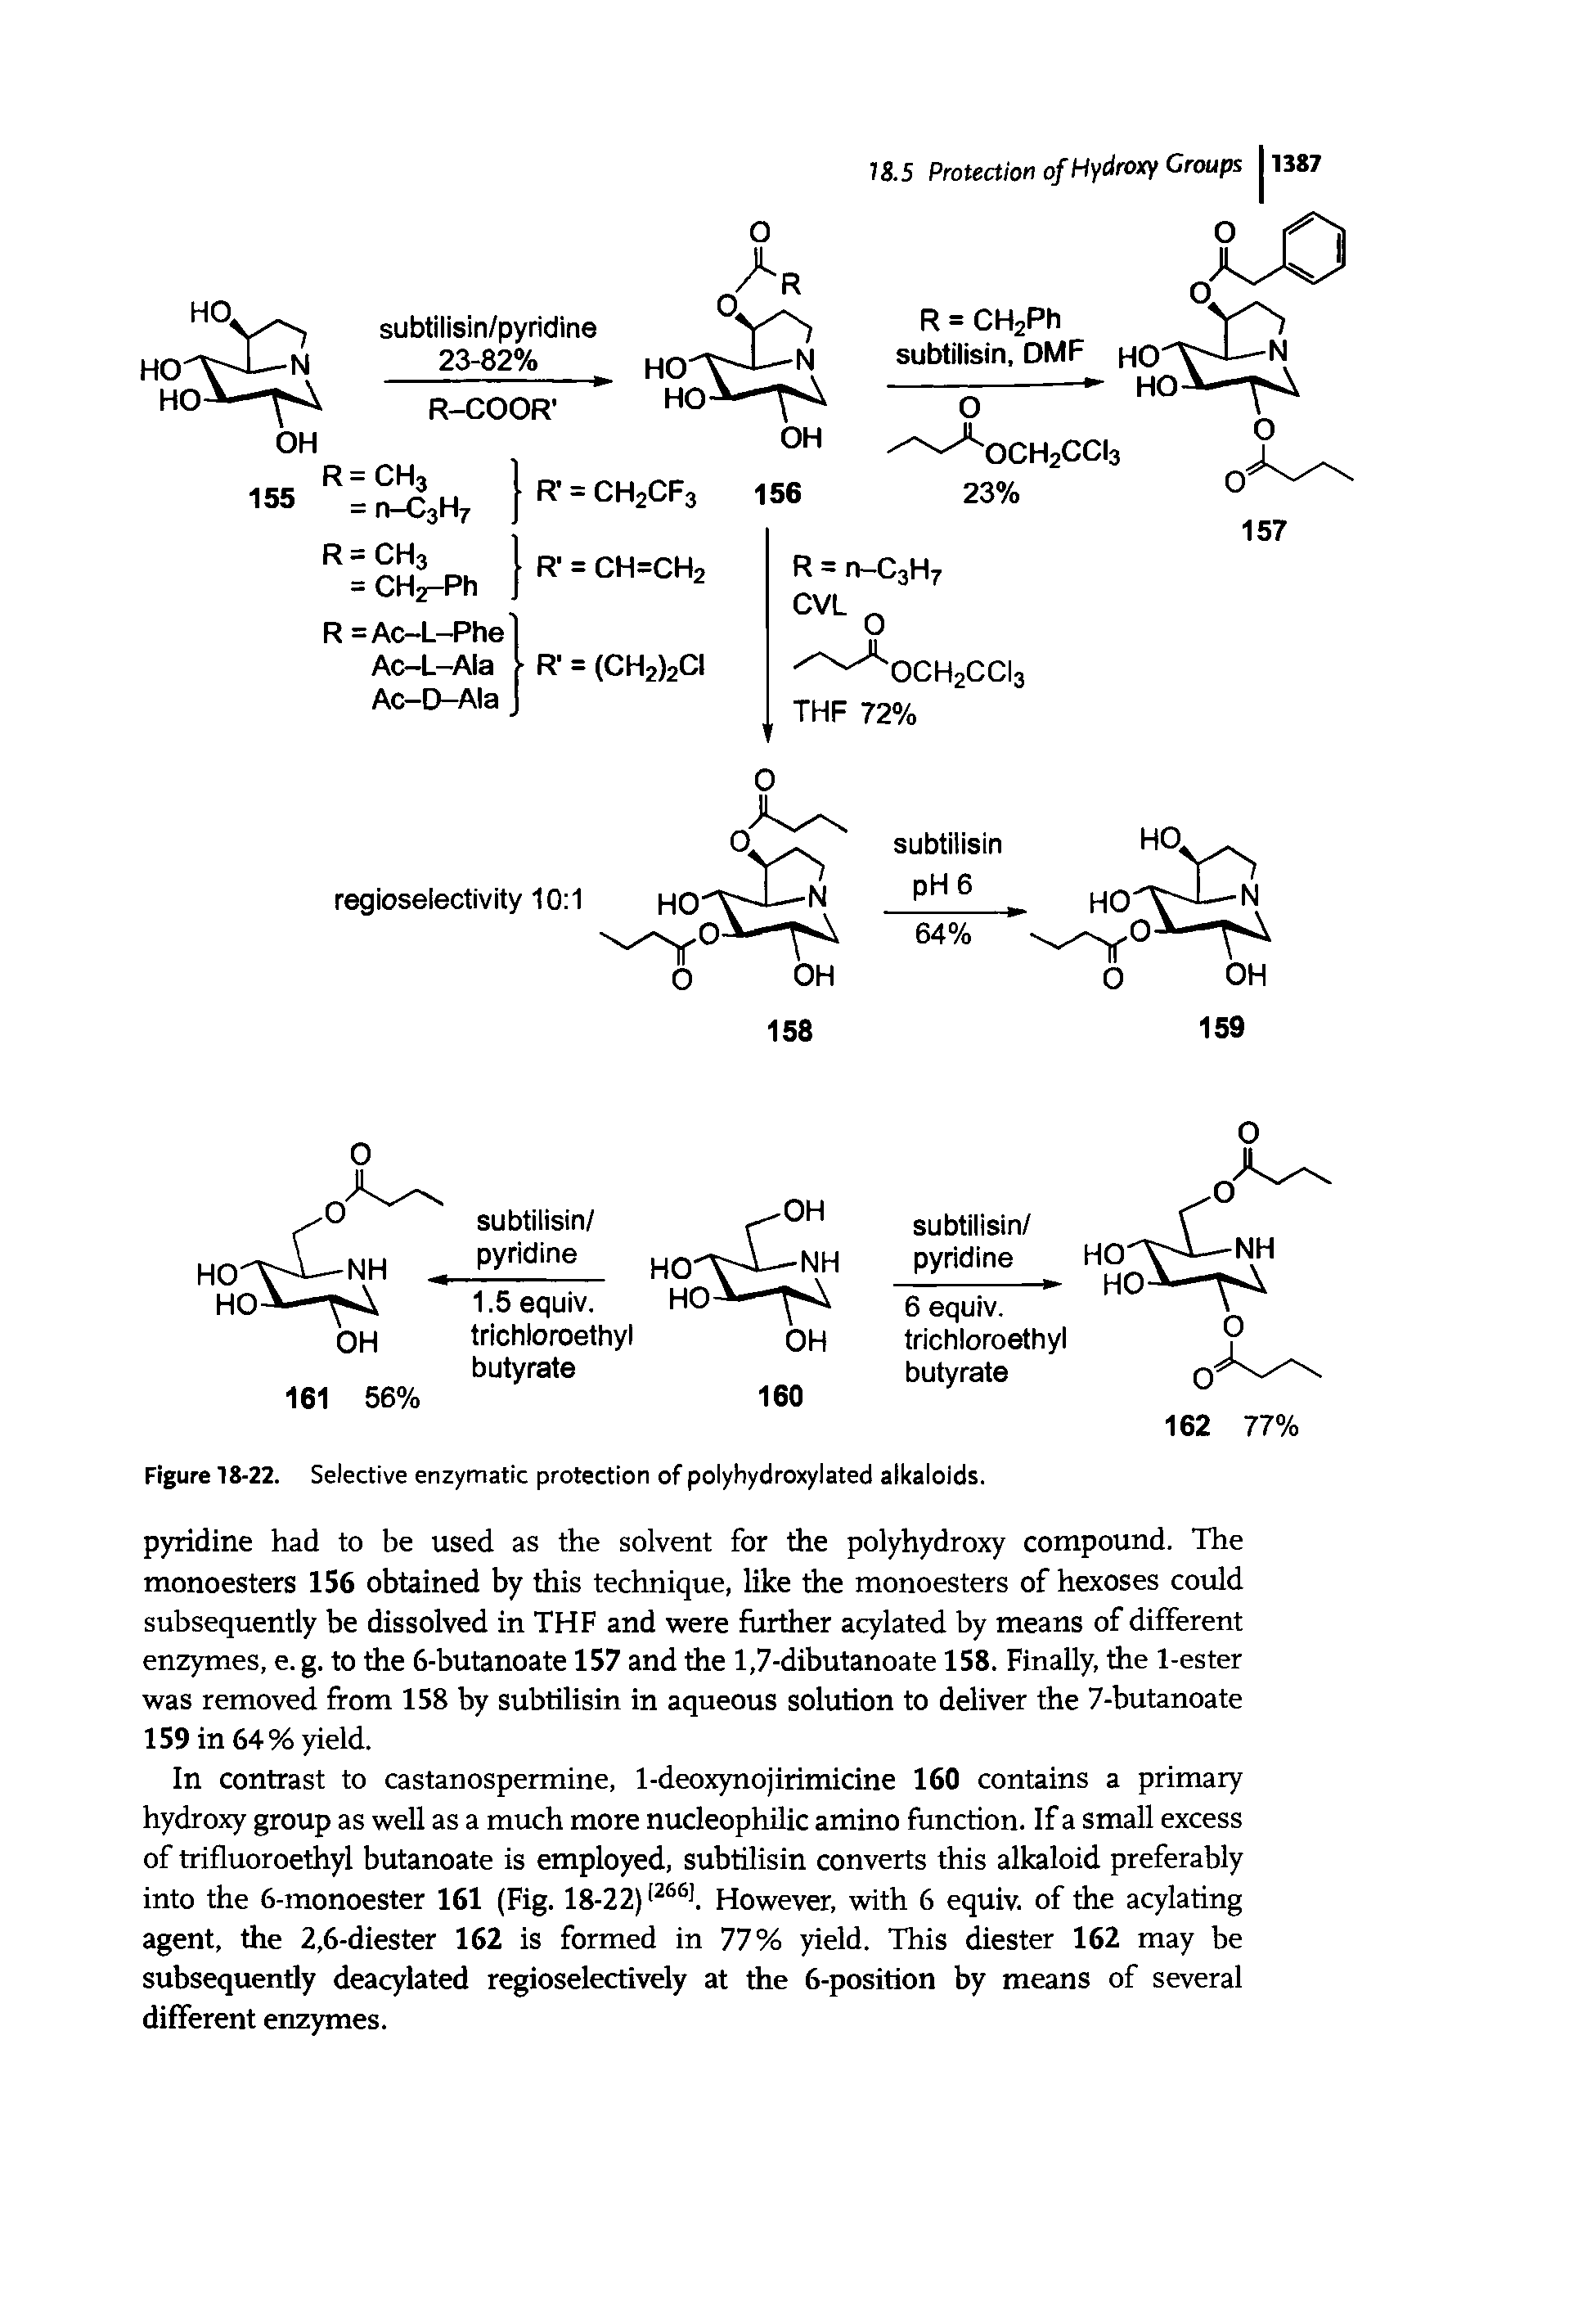 Figure 18-22. Selective enzymatic protection of polyhydroxylated alkaloids.